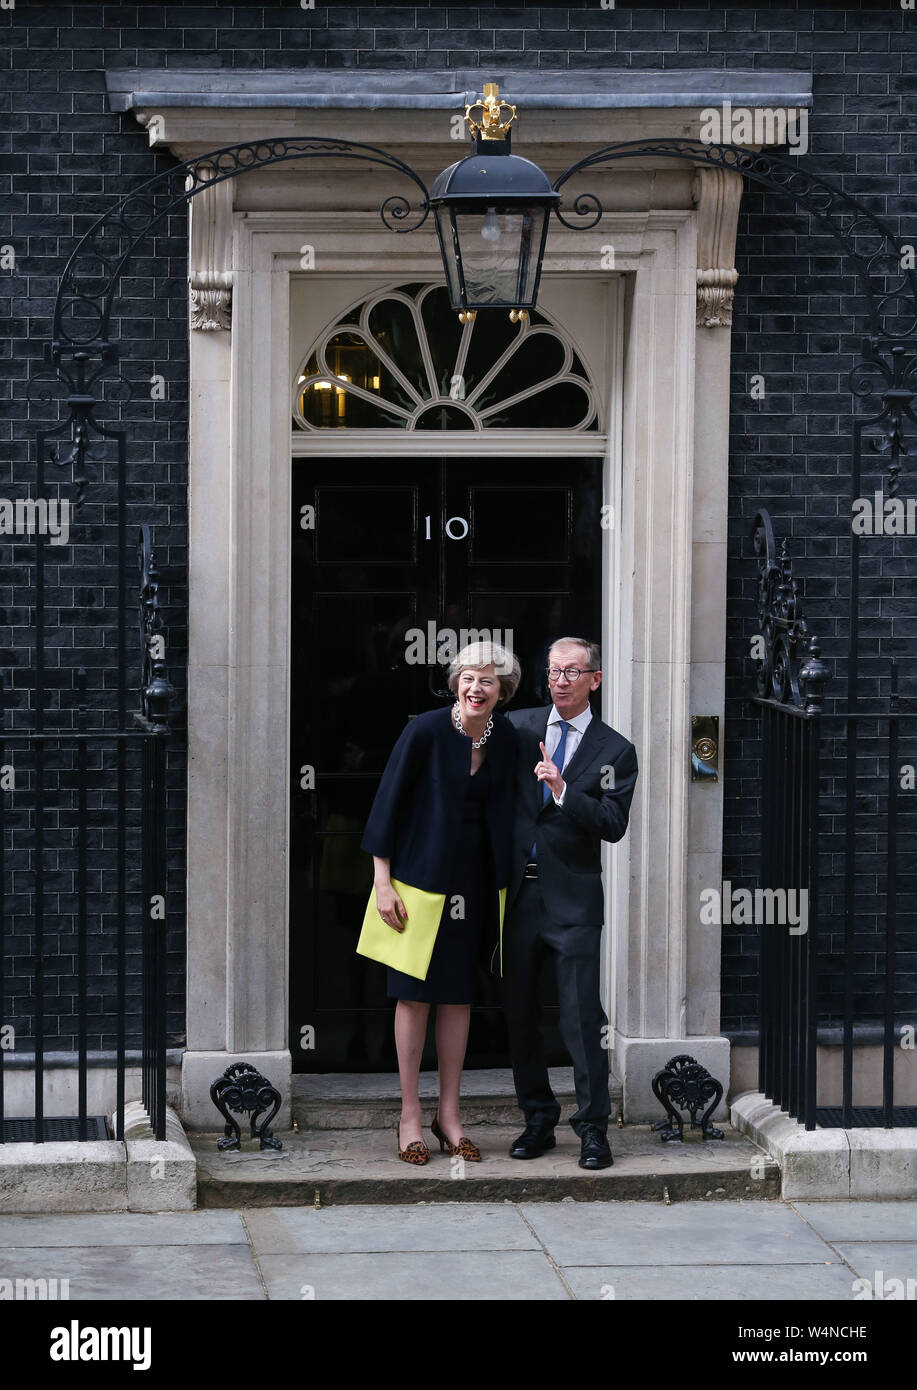 London, UK. 13th July, 2016. File photo taken on July 13, 2016 shows British Prime Minister Theresa May (L) and her husband posing for photos in front of 10 Downing Street in London, Britain. Newly-elected Conservative Party leader Boris Johnson took office as the British prime minister on Wednesday amid the rising uncertainties of Brexit. The latest development came after Theresa May formally stepped down as the leader of the country and Johnson was invited by the Queen to form the government. Credit: Han Yan/Xinhua/Alamy Live News Stock Photo